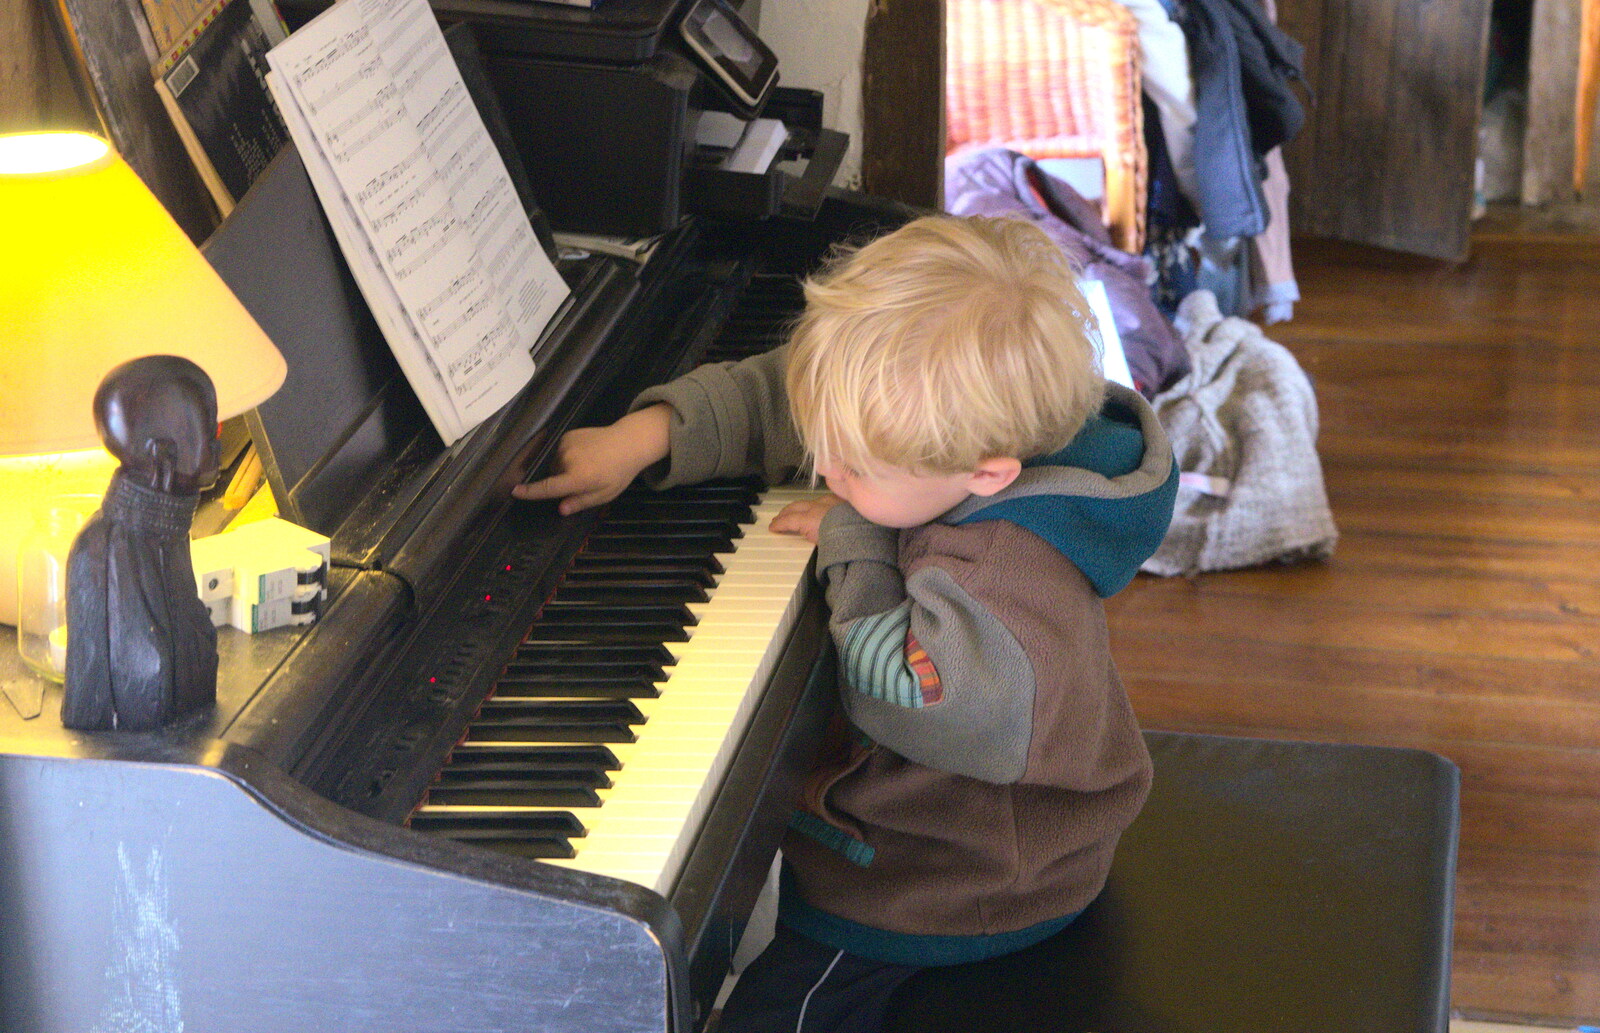 Harry pokes buttons on the piano from On Being Two: Harry's Birthday, Brome, Suffolk - 28th March 2014